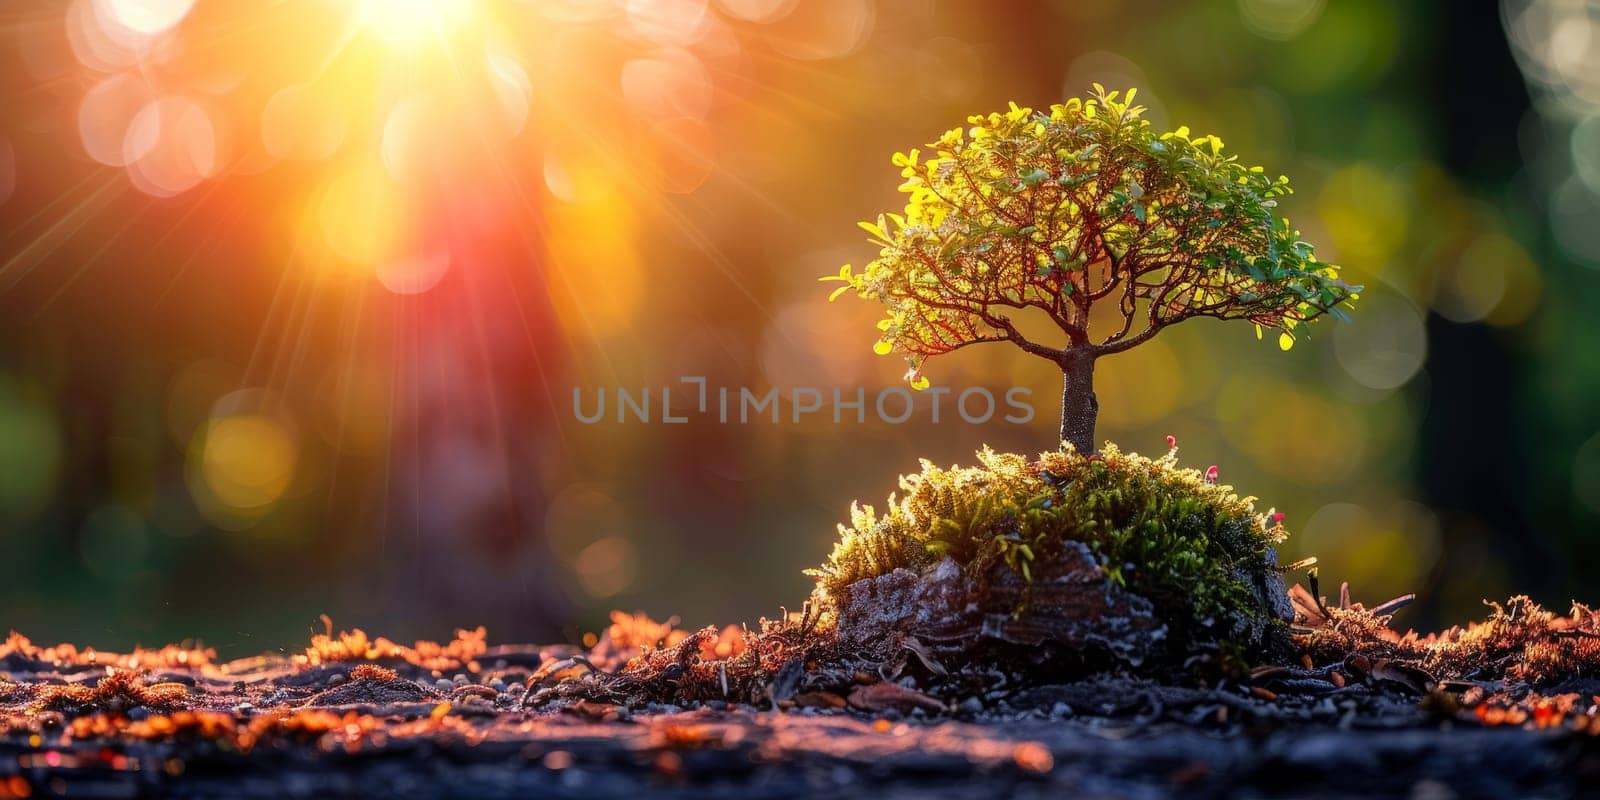 Vibrant autumn nature scene with miniature tree and sunlight. Concept of change of seasons, growth, and new beginnings.